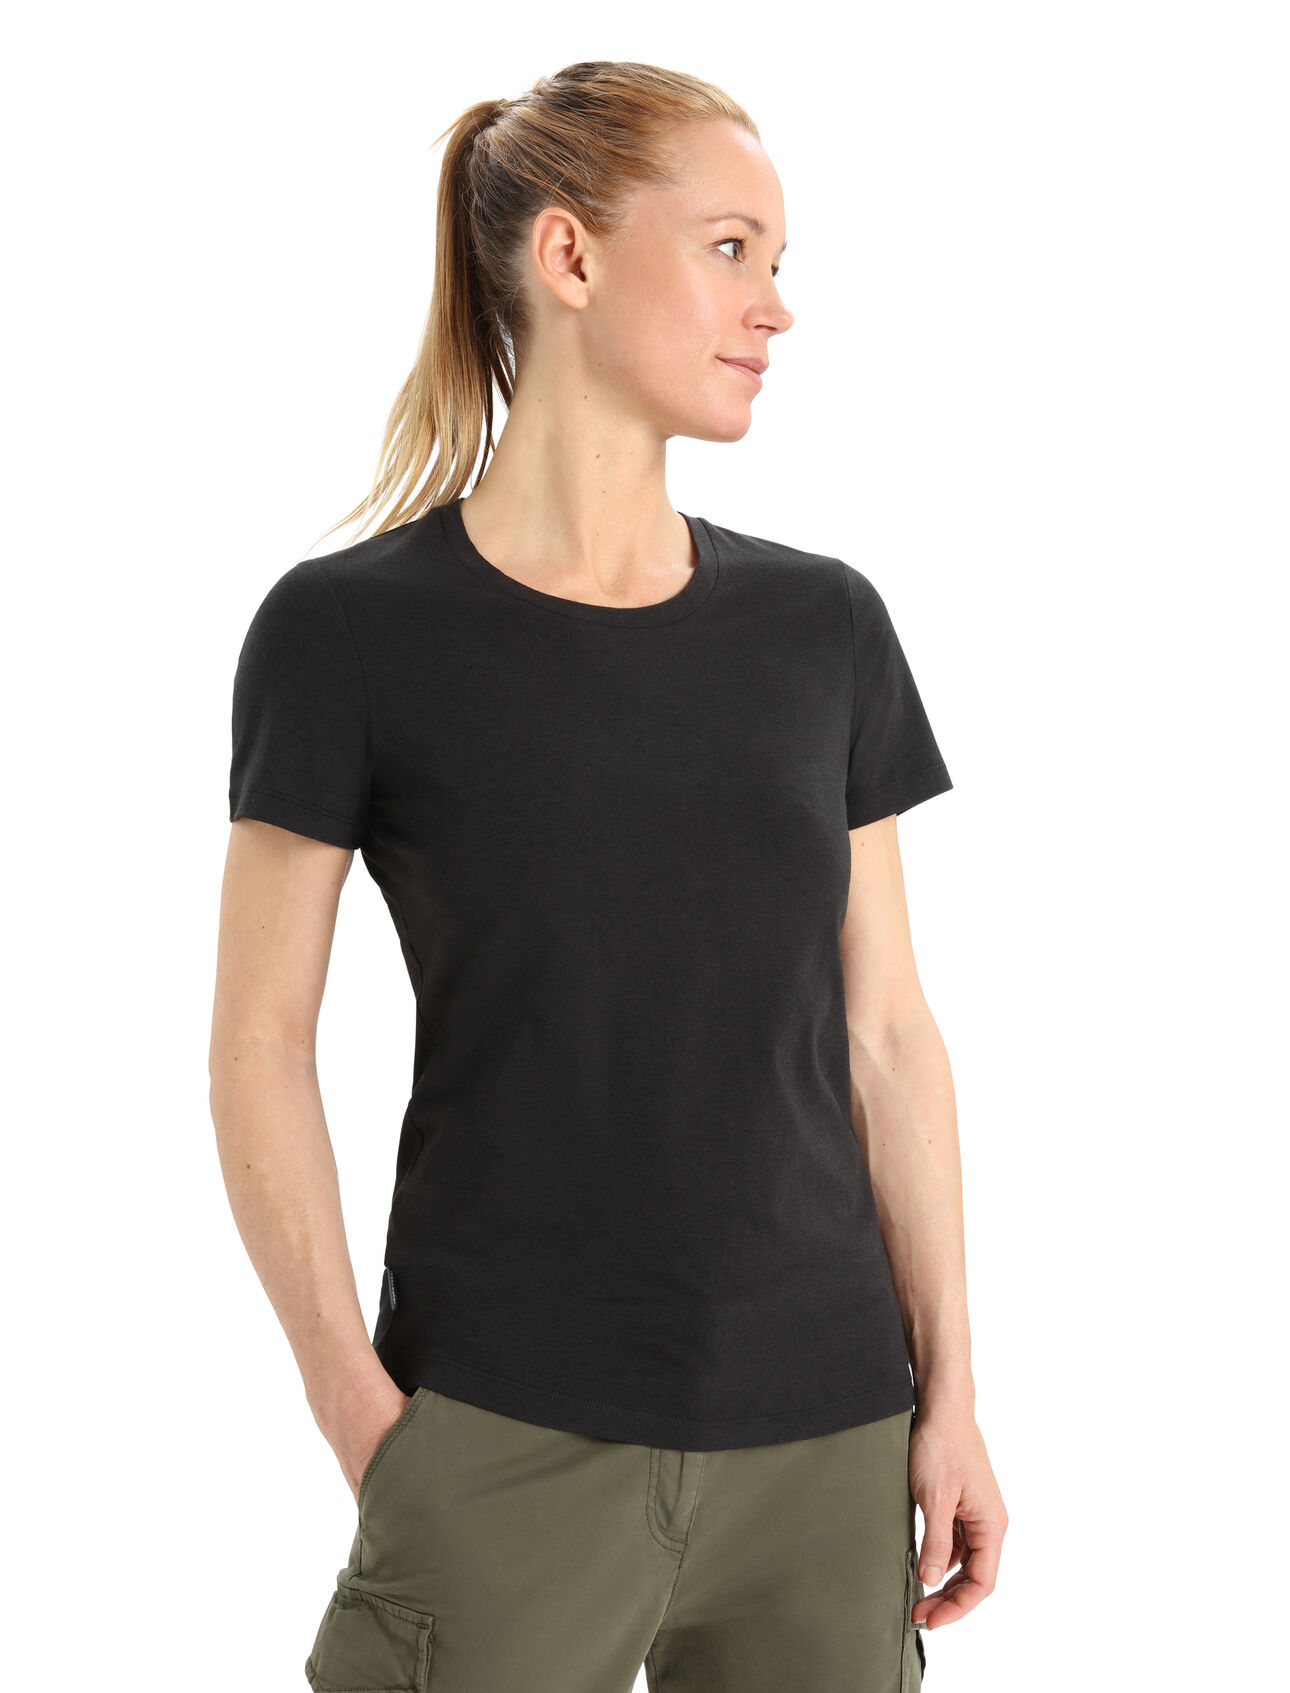 Womens Merino Blend Central Classic T-Shirt A versatile, everyday tee that goes anywhere in comfort, the Central Classic Short Sleeve Tee features a sustainable blend of natural merino wool and soft organically grown cotton.